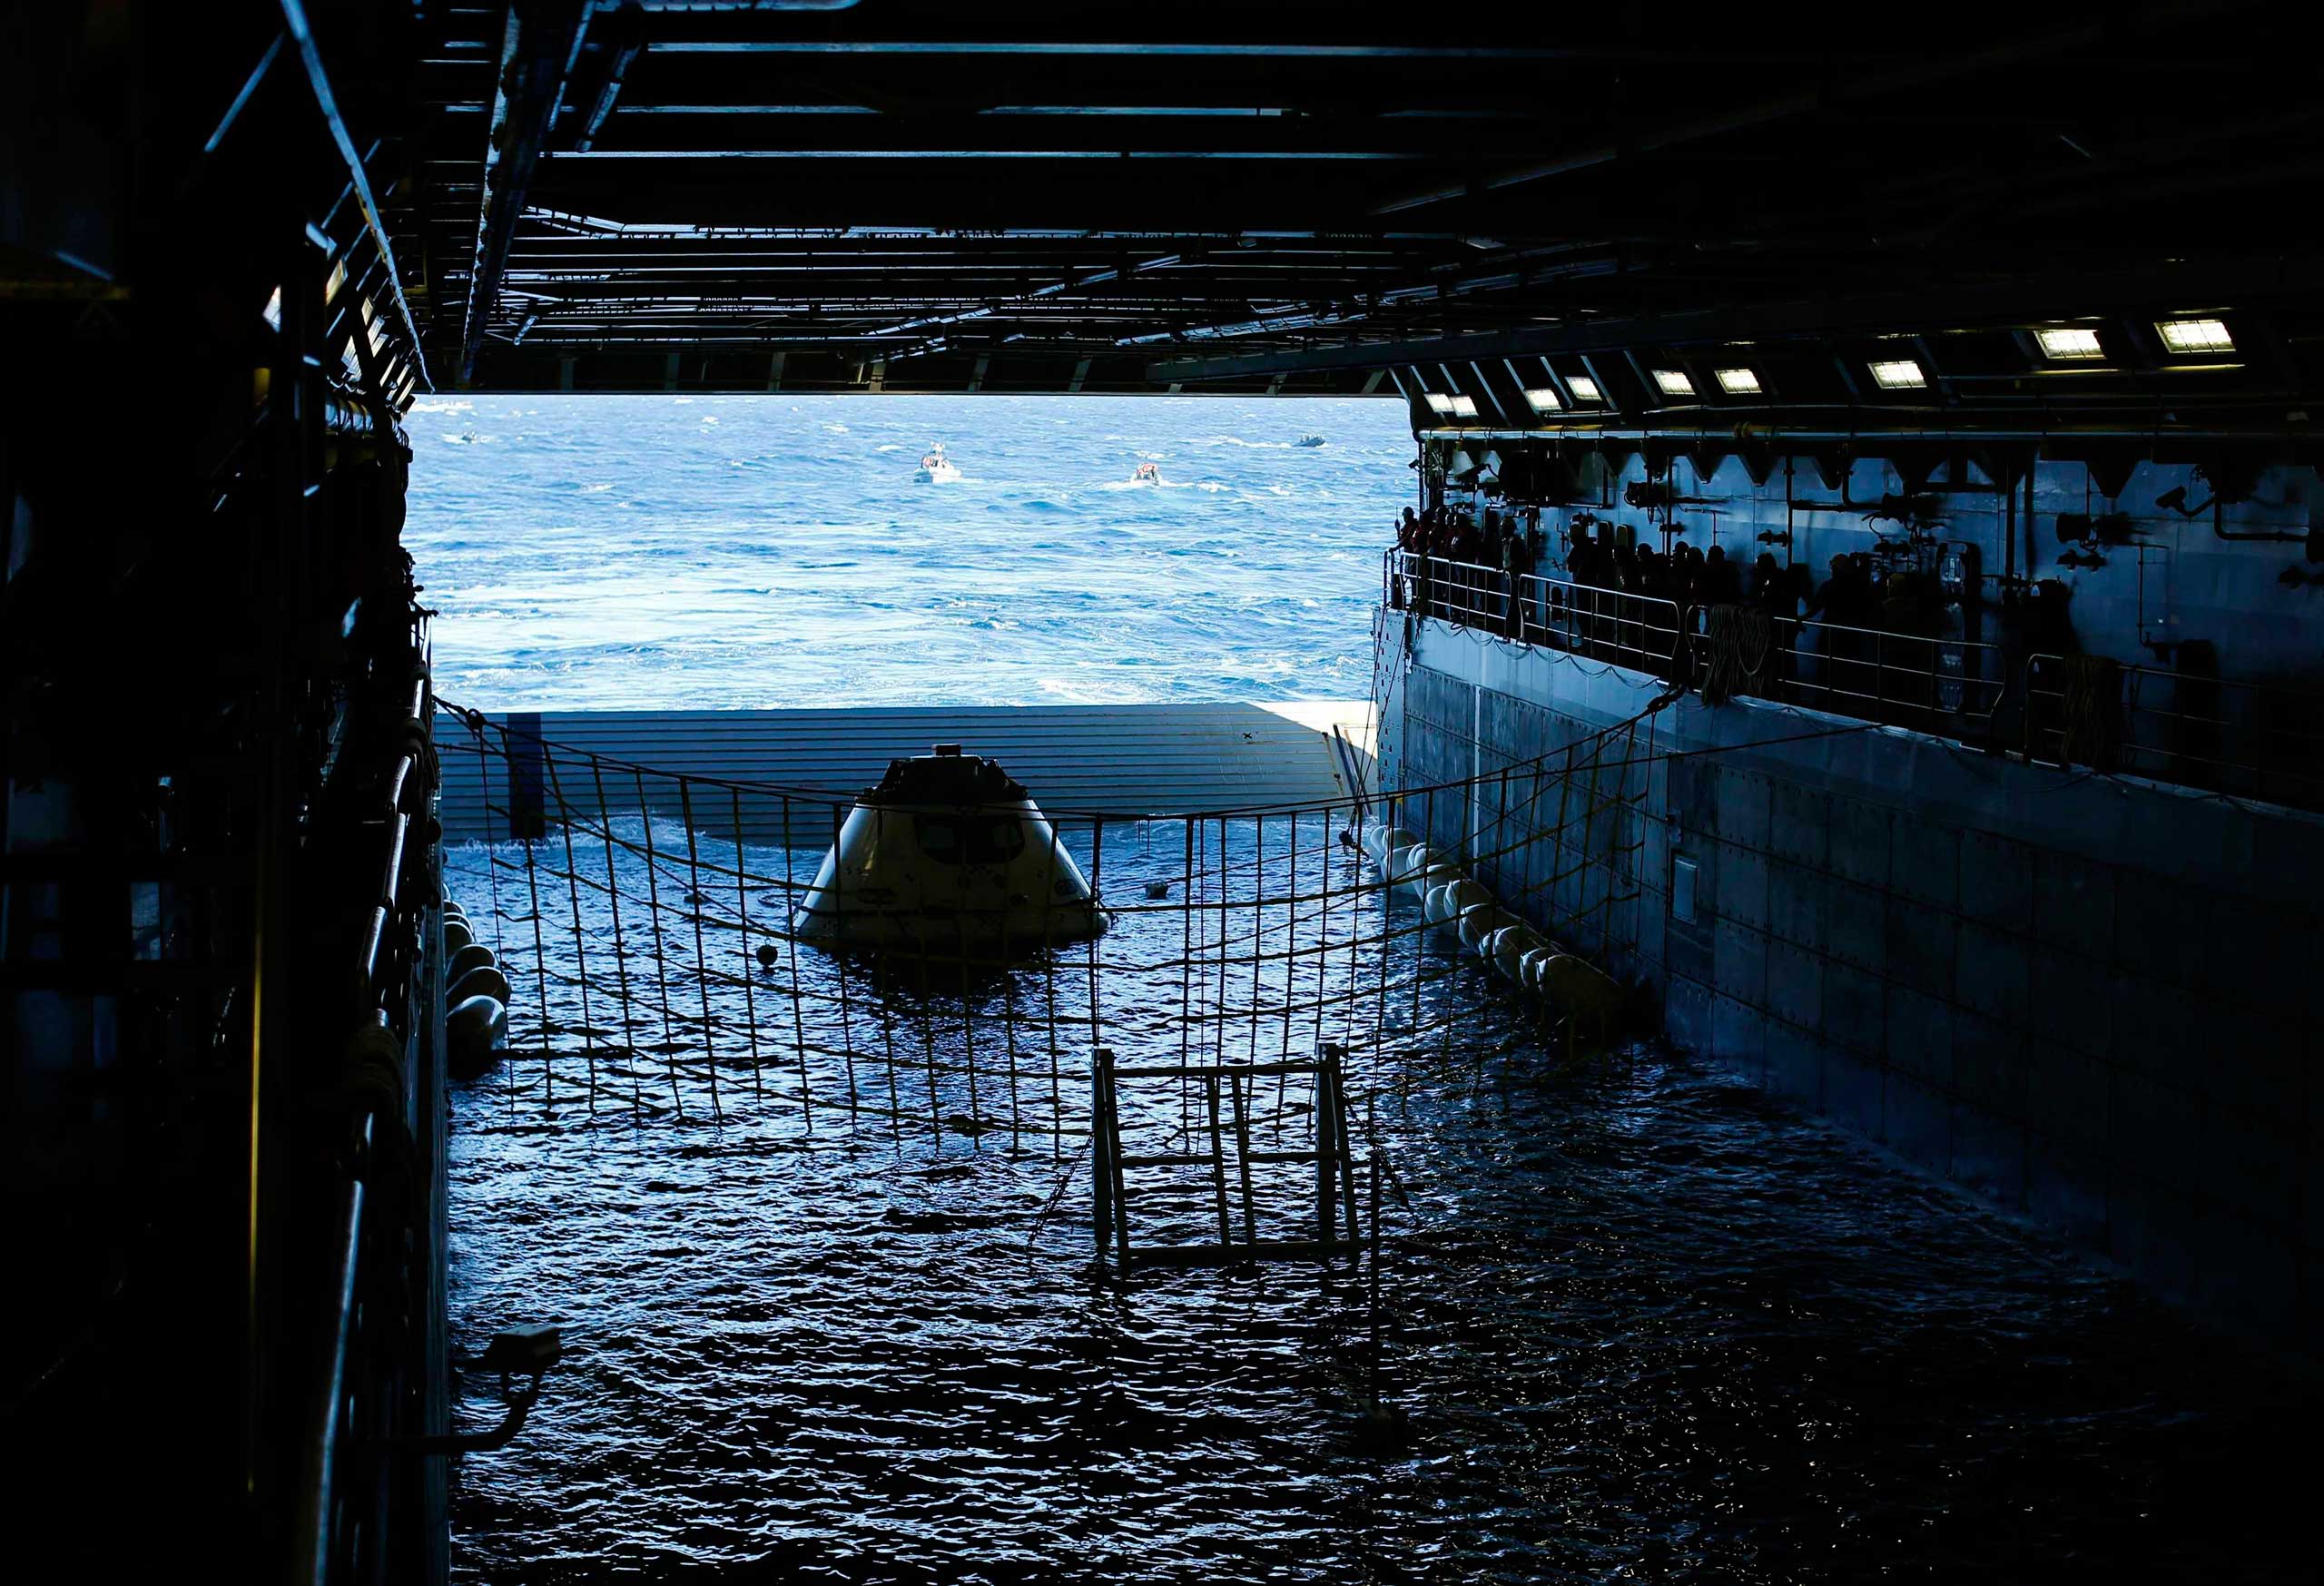 Sept. 15, 2014. A test version of NASA's Orion capsule floats in the rear of the USS Anchorage during a recovery drill off the coast of California.